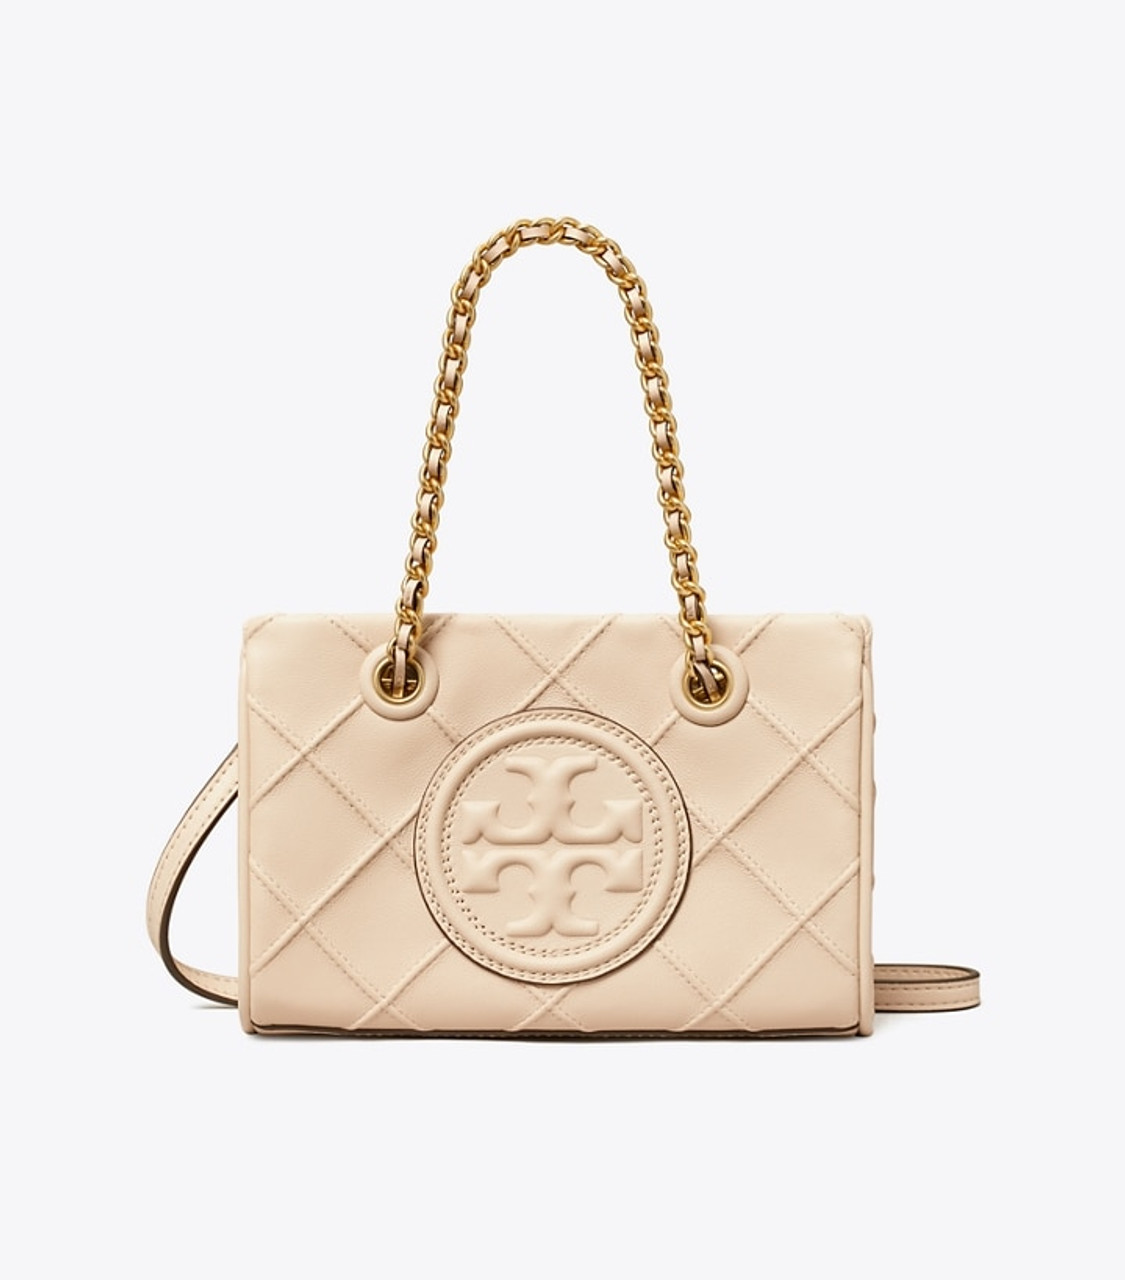 Tory Burch Quilted Leather Fleming Soft Mini Bucket Bag - FINAL